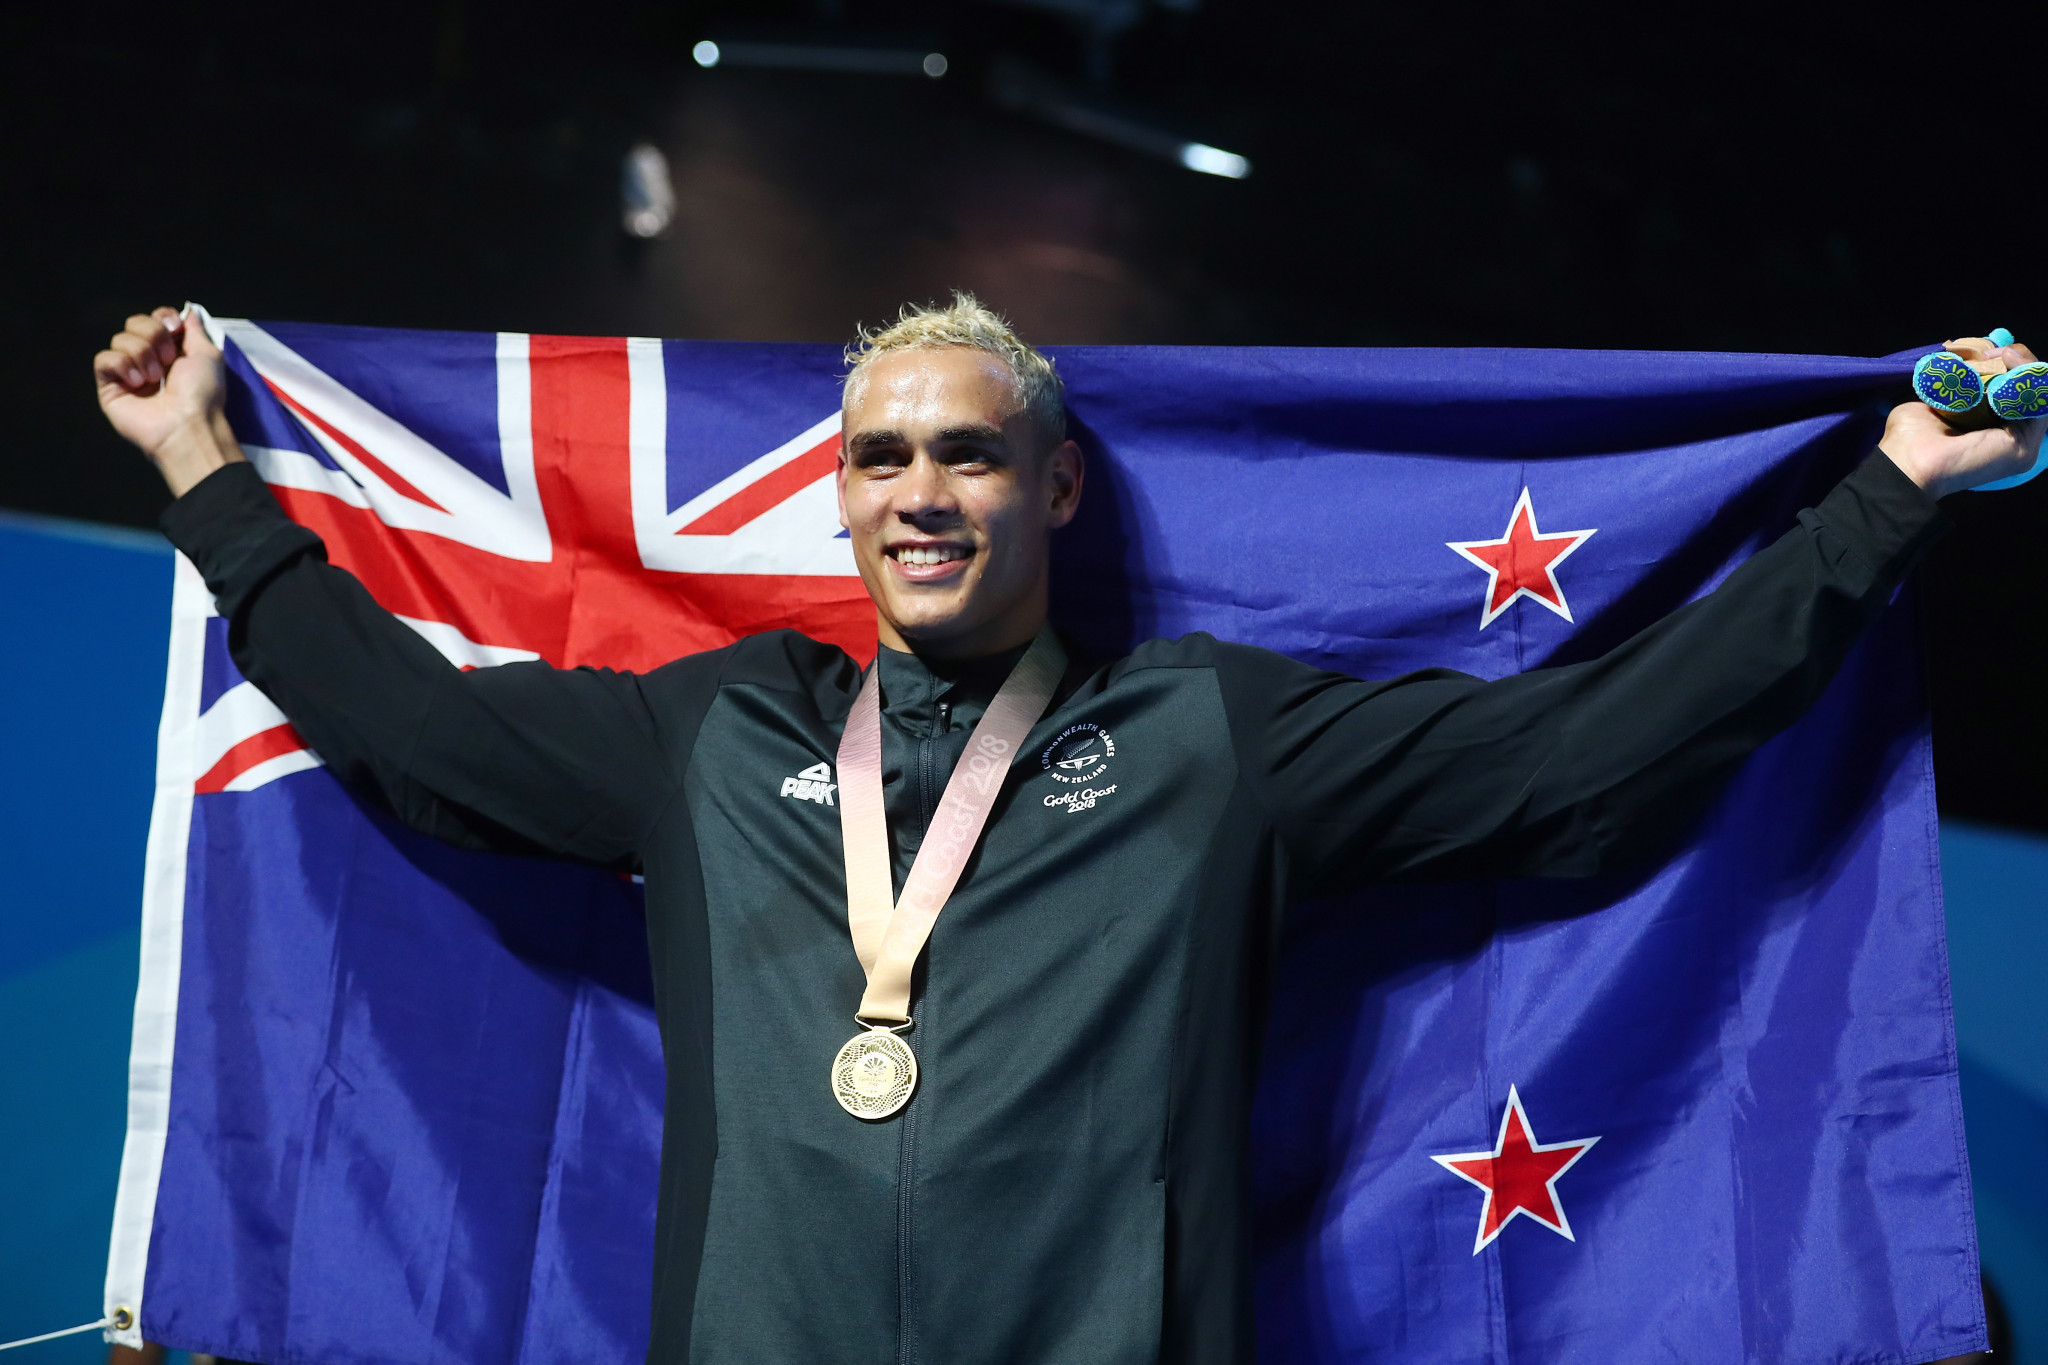 David Nyika won his second Commonwealth Games gold medal at the Gold Coast 2018 ©Getty Images 